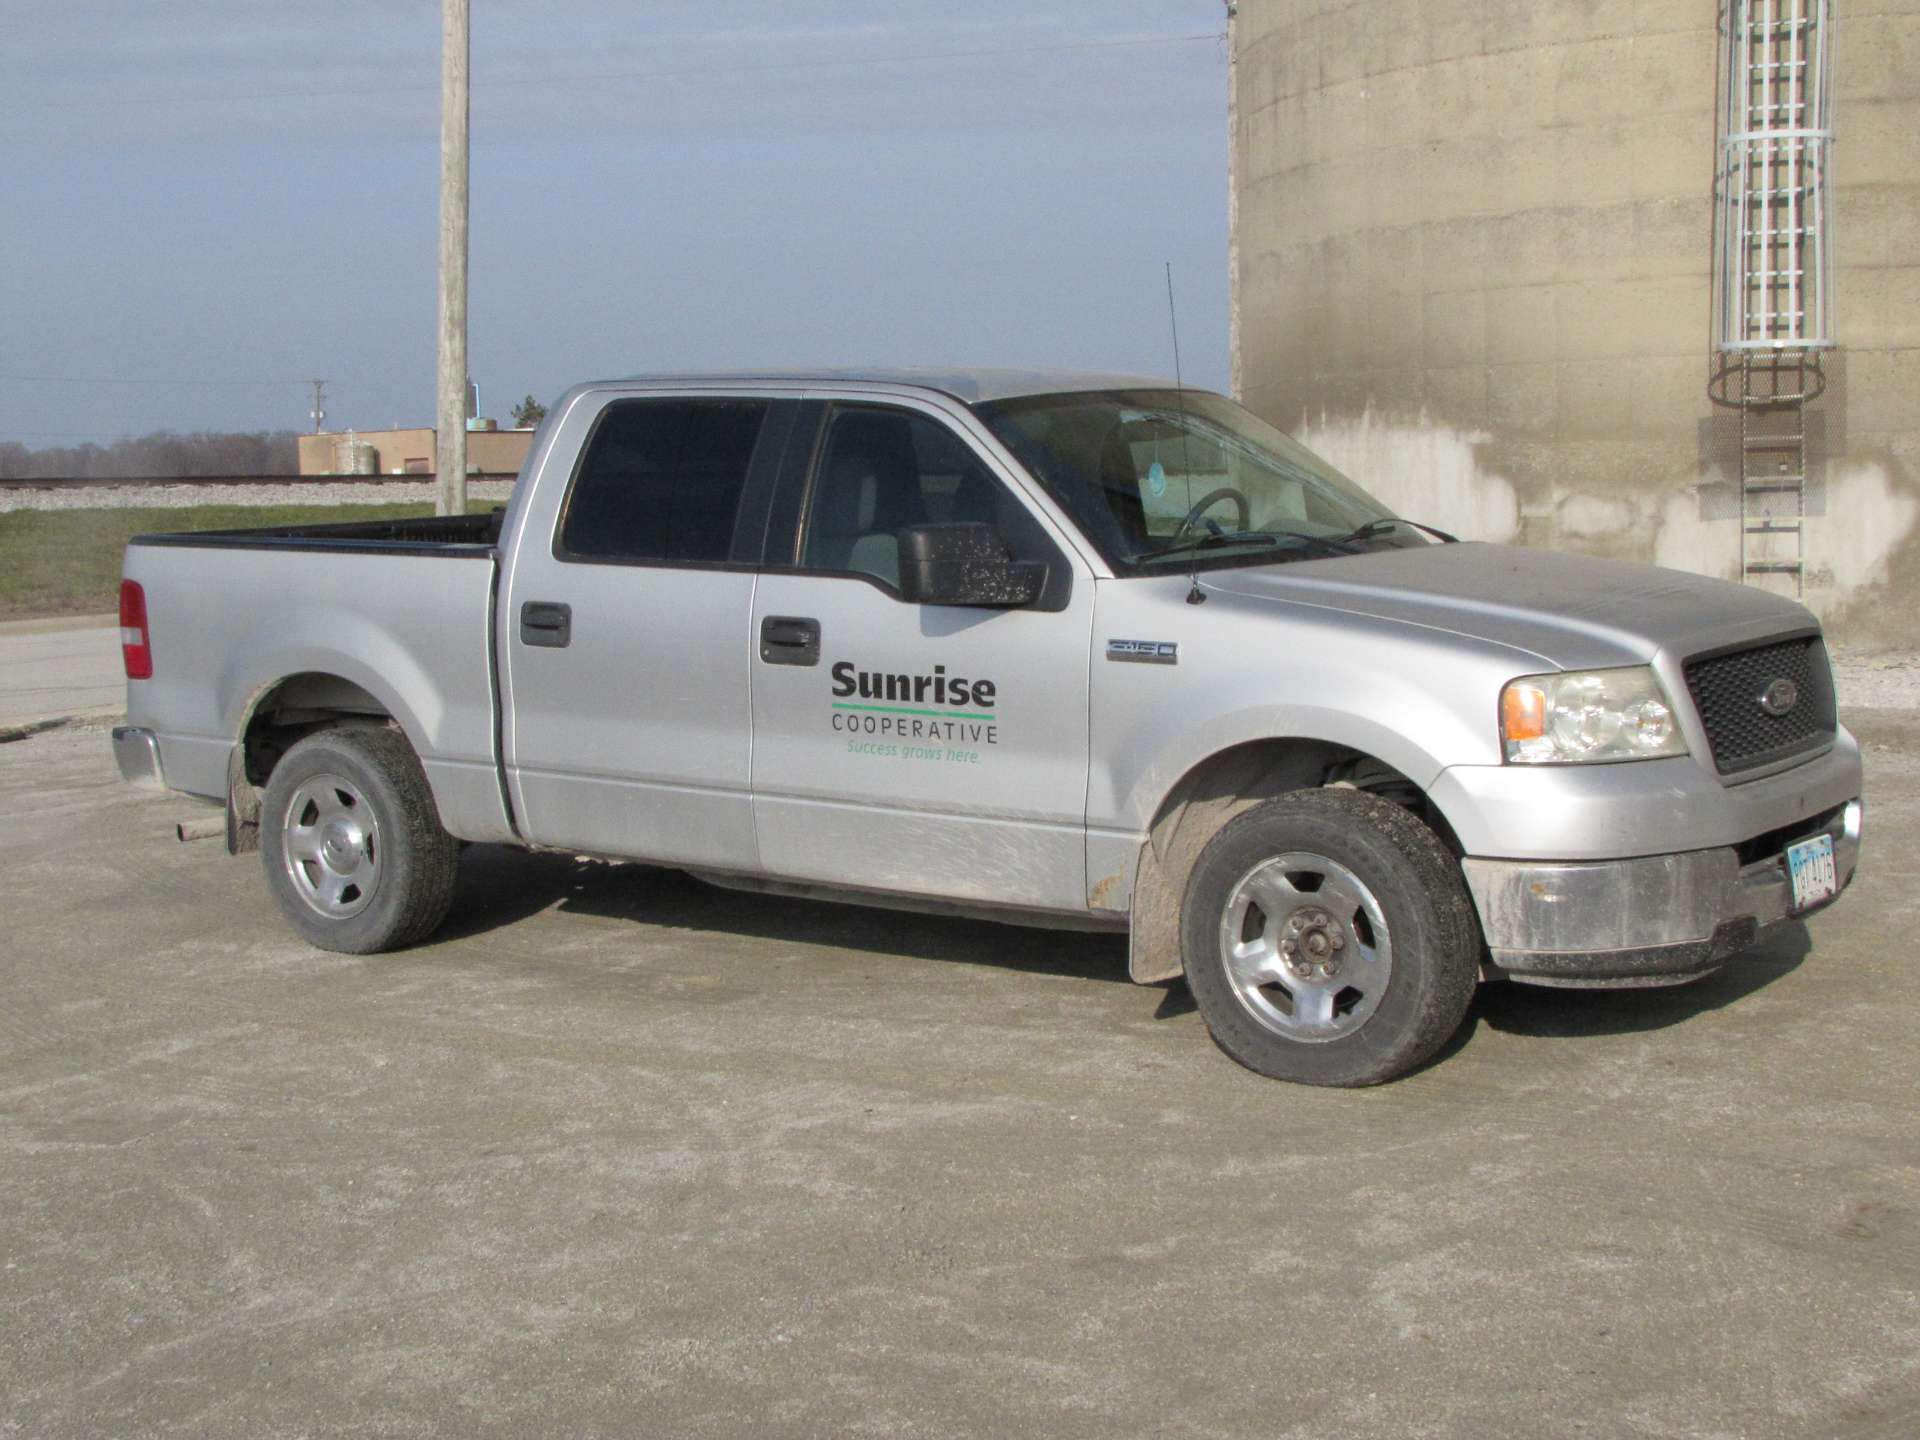 2005 Ford F-150 XLT pickup truck - Image 14 of 89